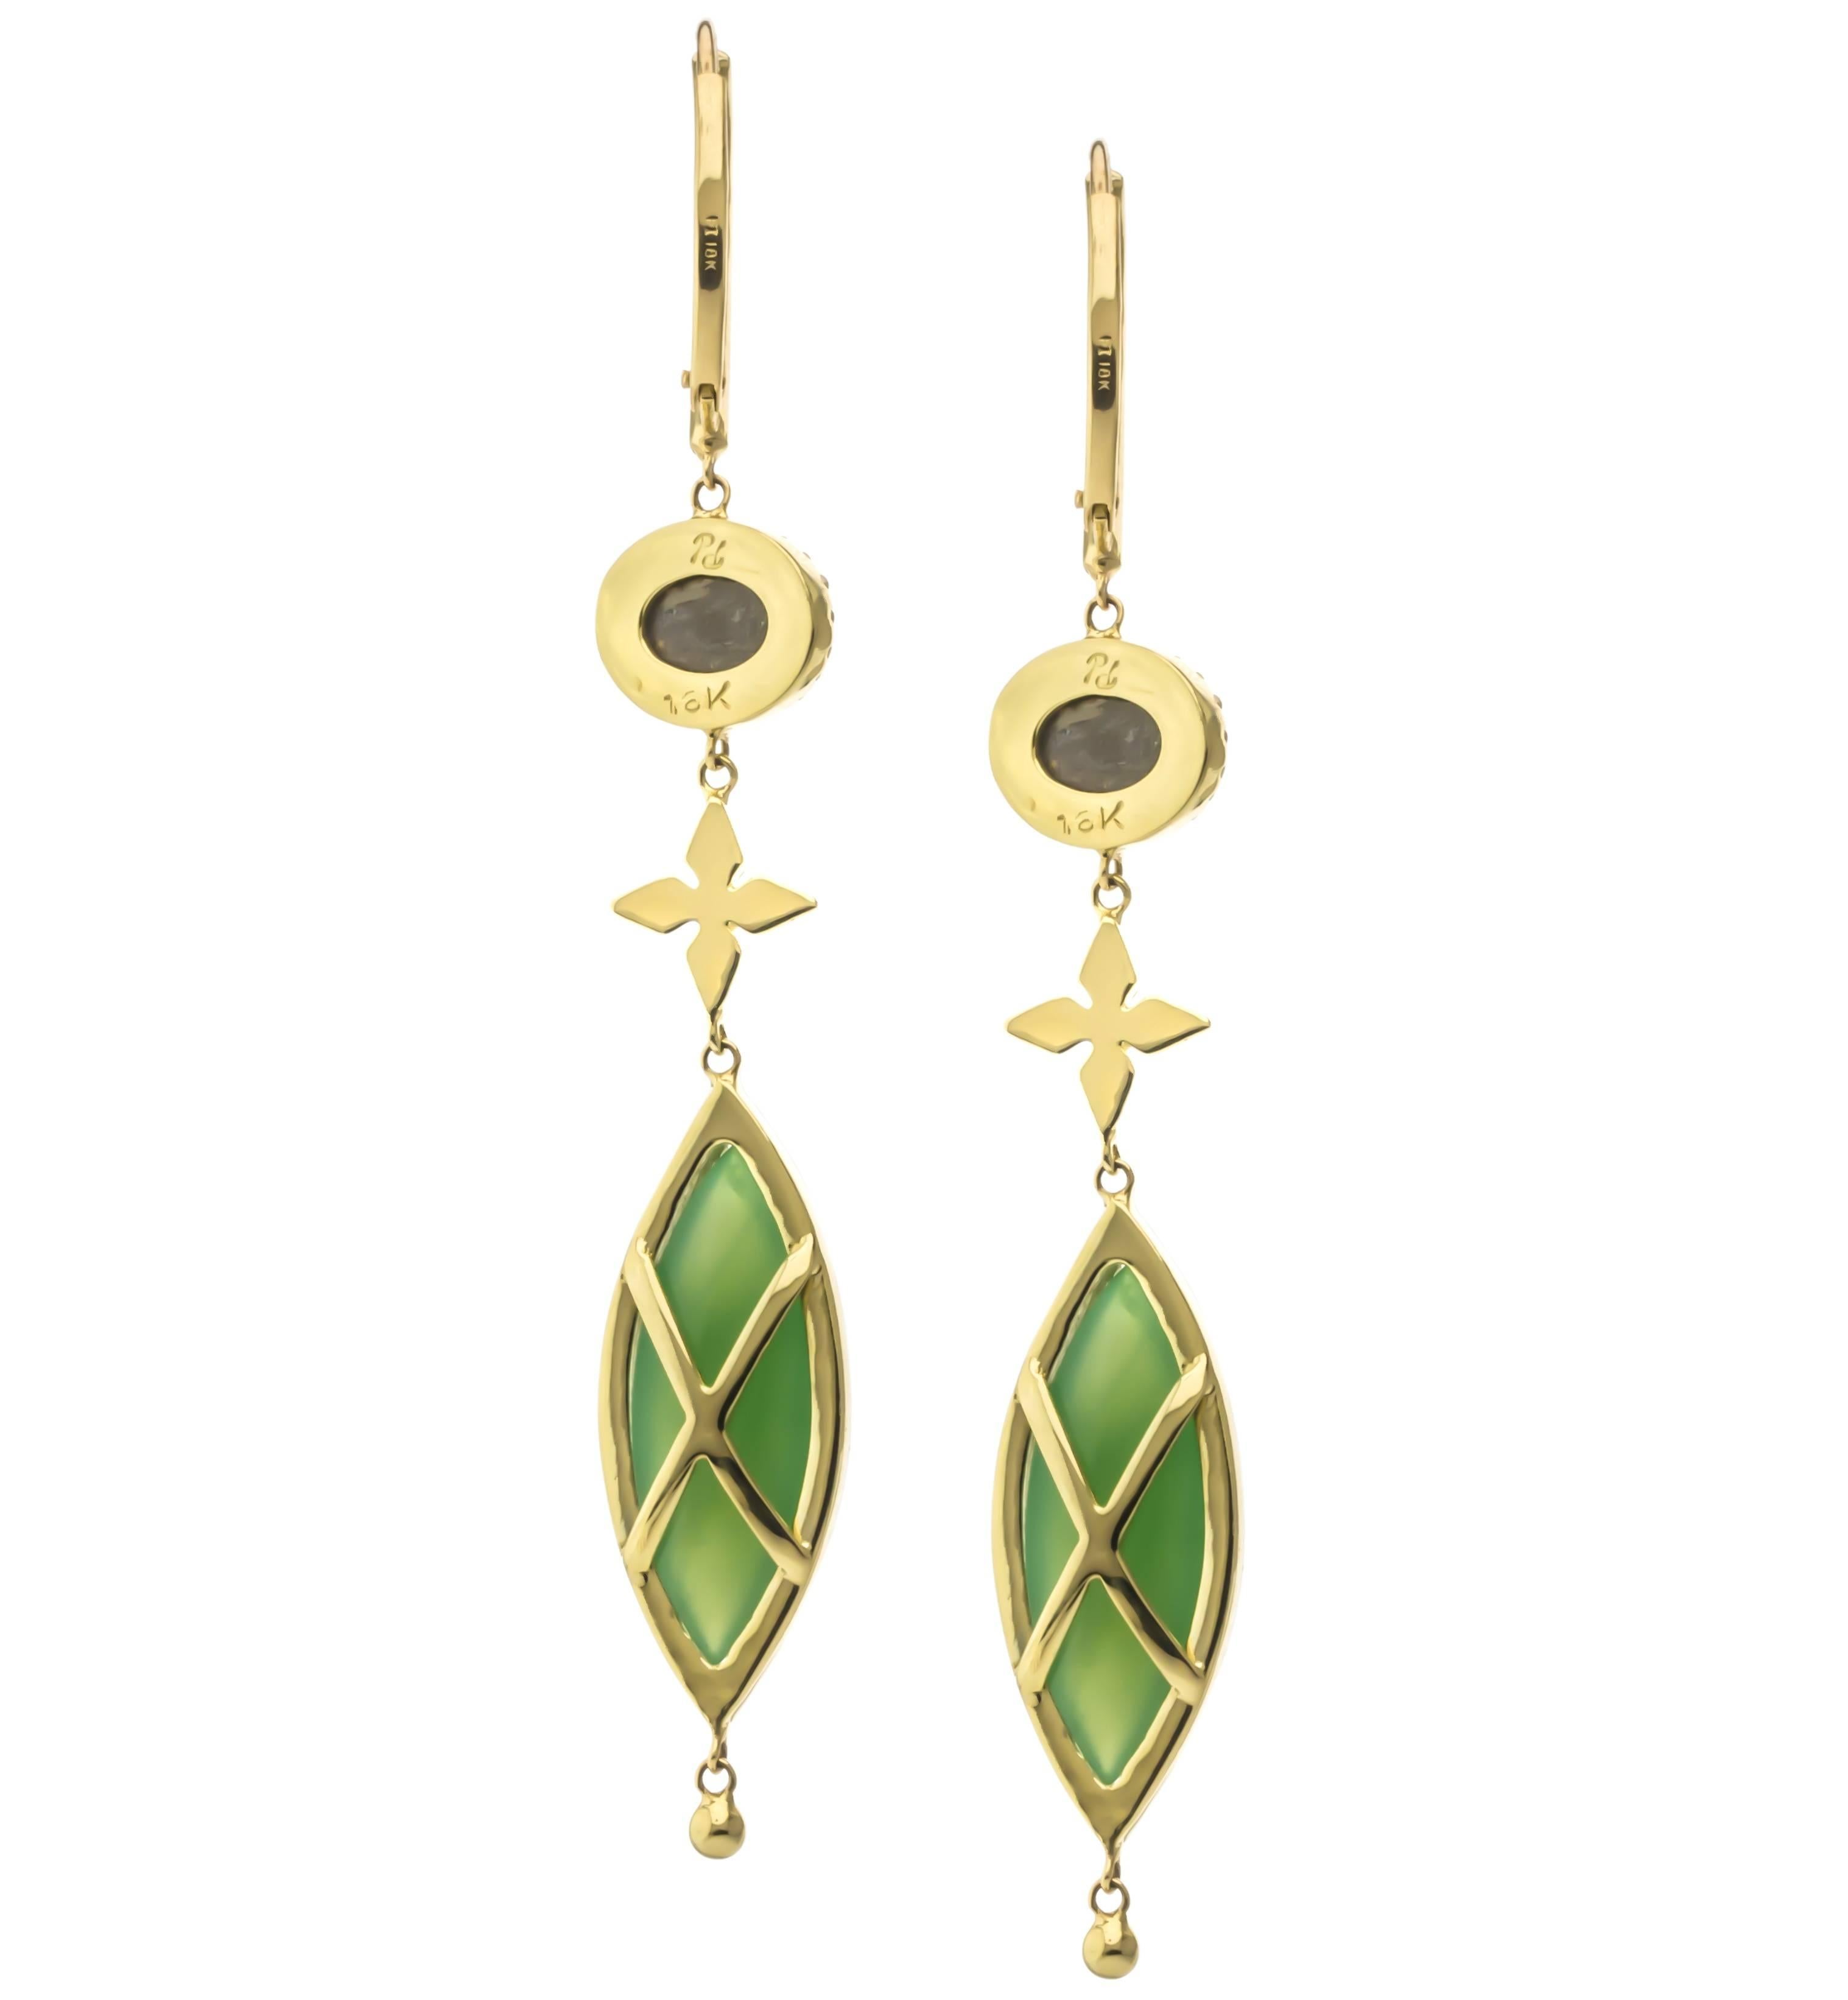 One of a kind 18K yellow gold transvaal jade, black star sapphire, and diamond dangle earrings.  Set with two marquise shaped transvaal jade weighing 8.02 carats, two oval black star sapphire weighing 2.38 carats, and one hundred and seventy-two